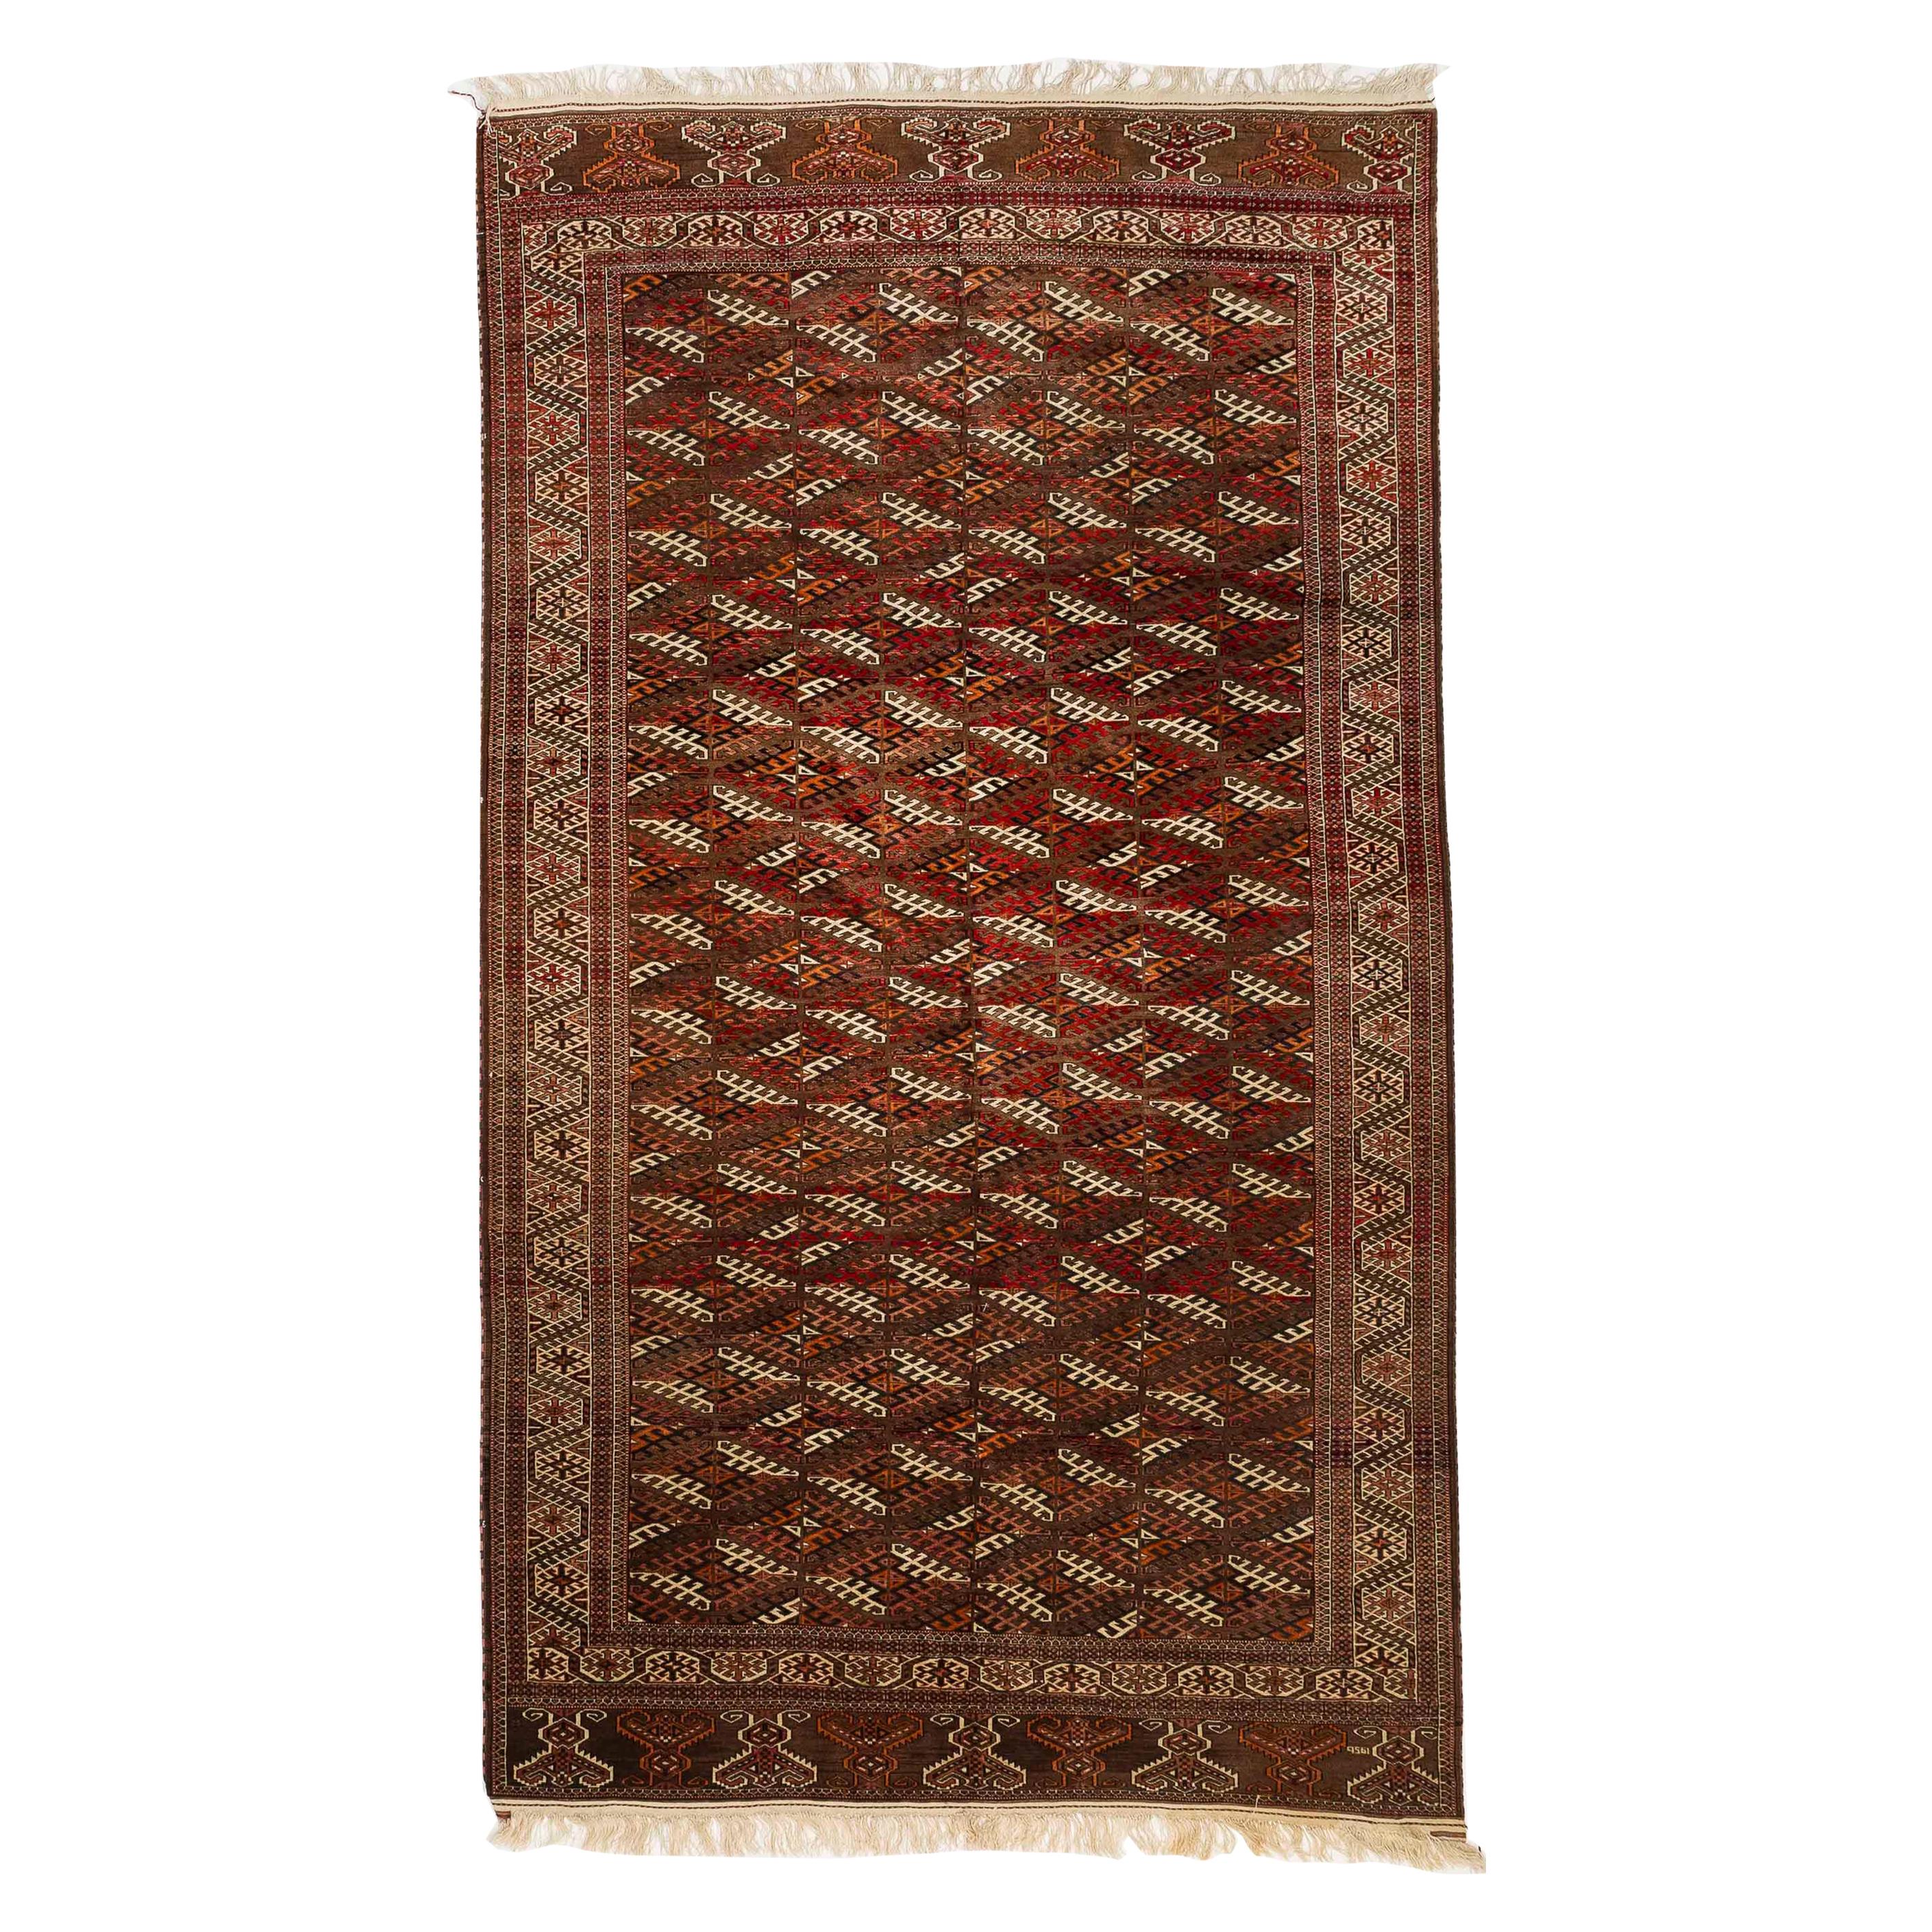 Antique Persian Turkmen Rug with Black and White Diamond Patterns on Red Field For Sale